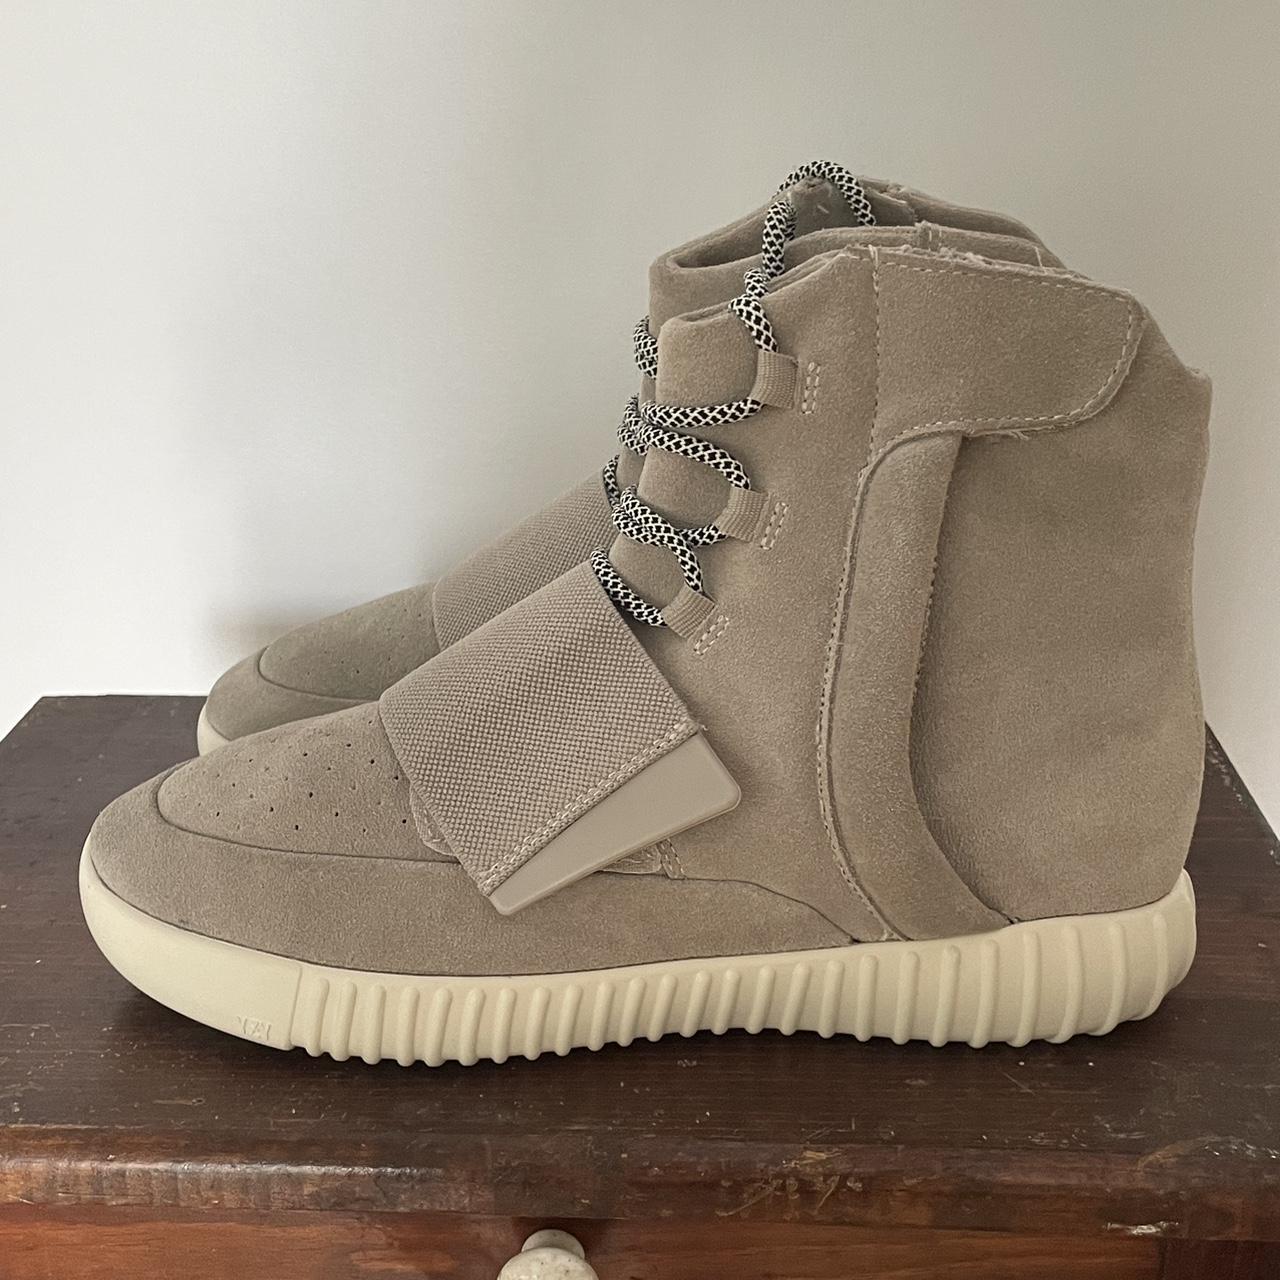 Yeezy 750 OG colorway, worn, but not used outside.... - Depop